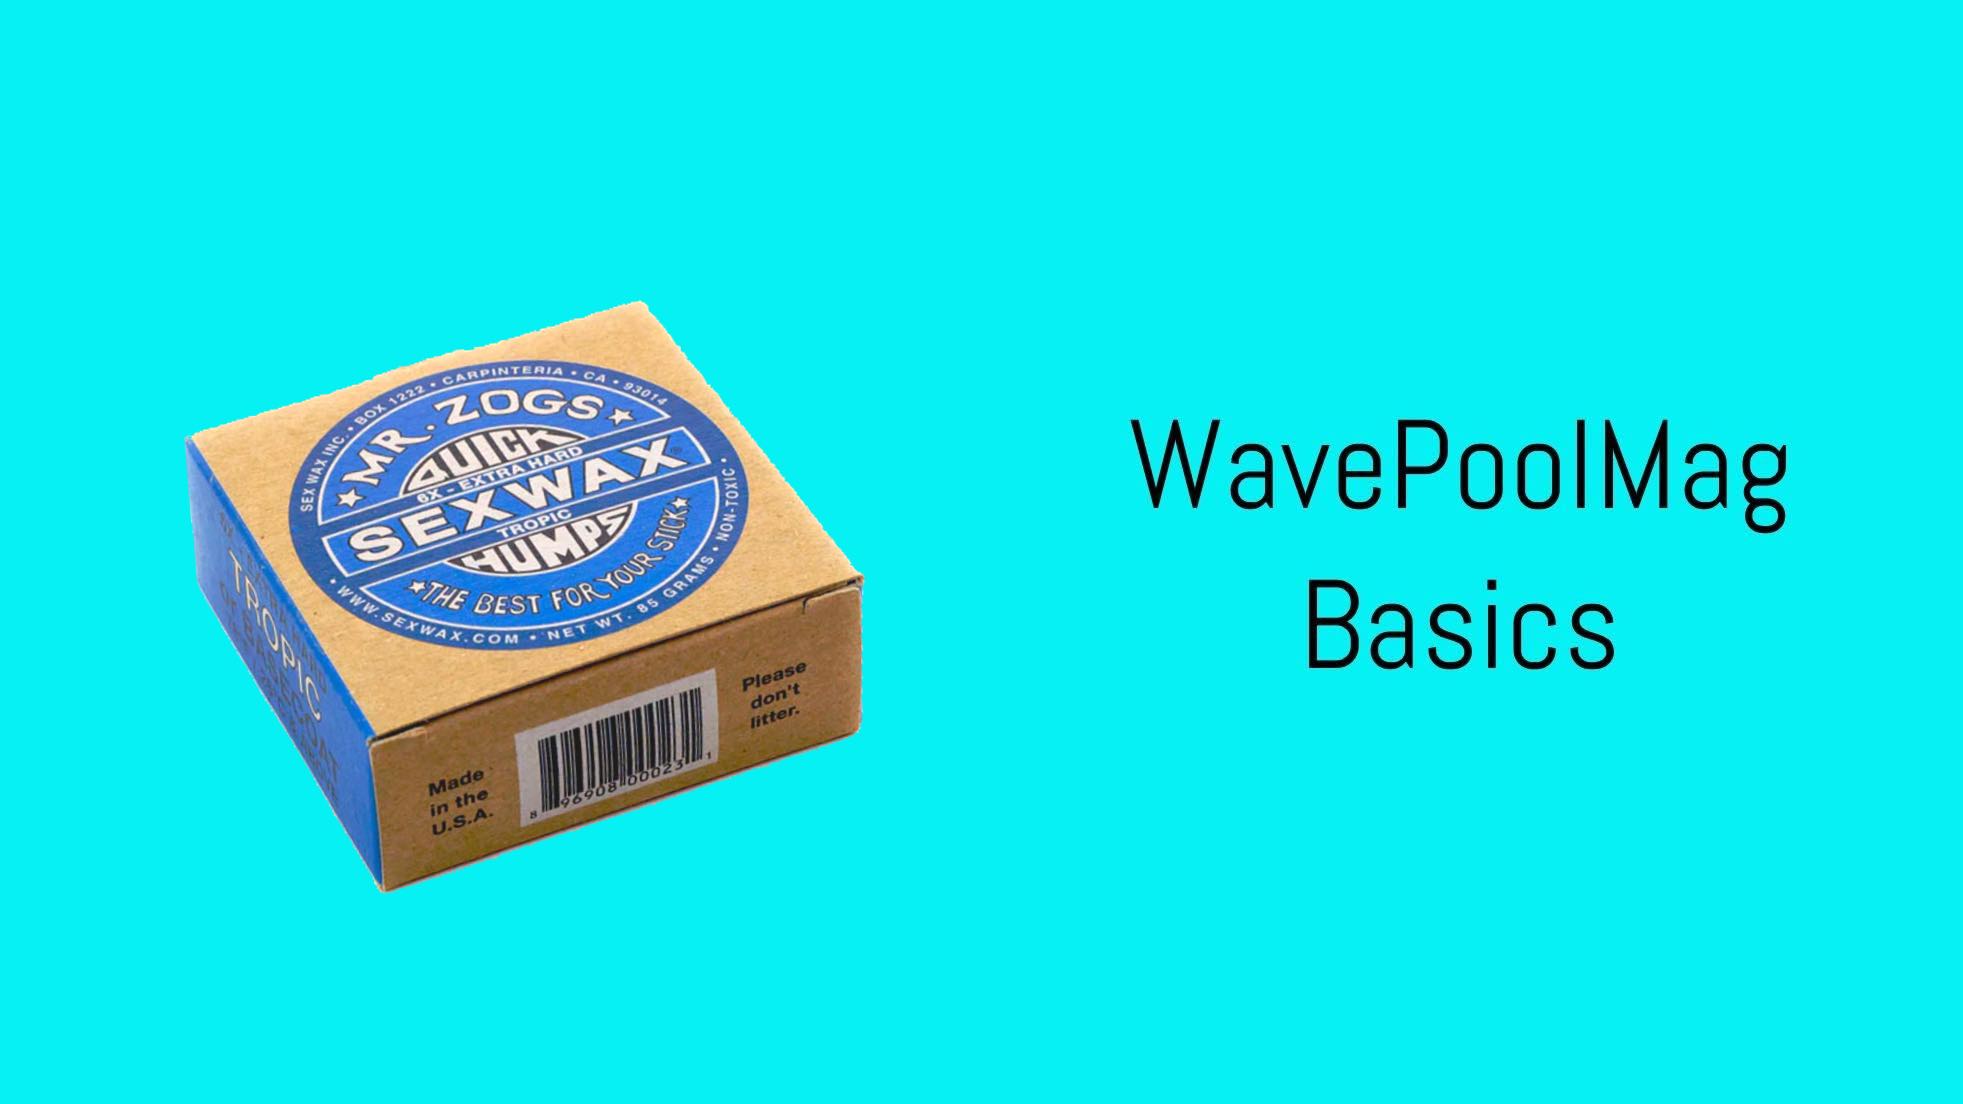 This article covers surfboard wax, its history, types of wax and application.